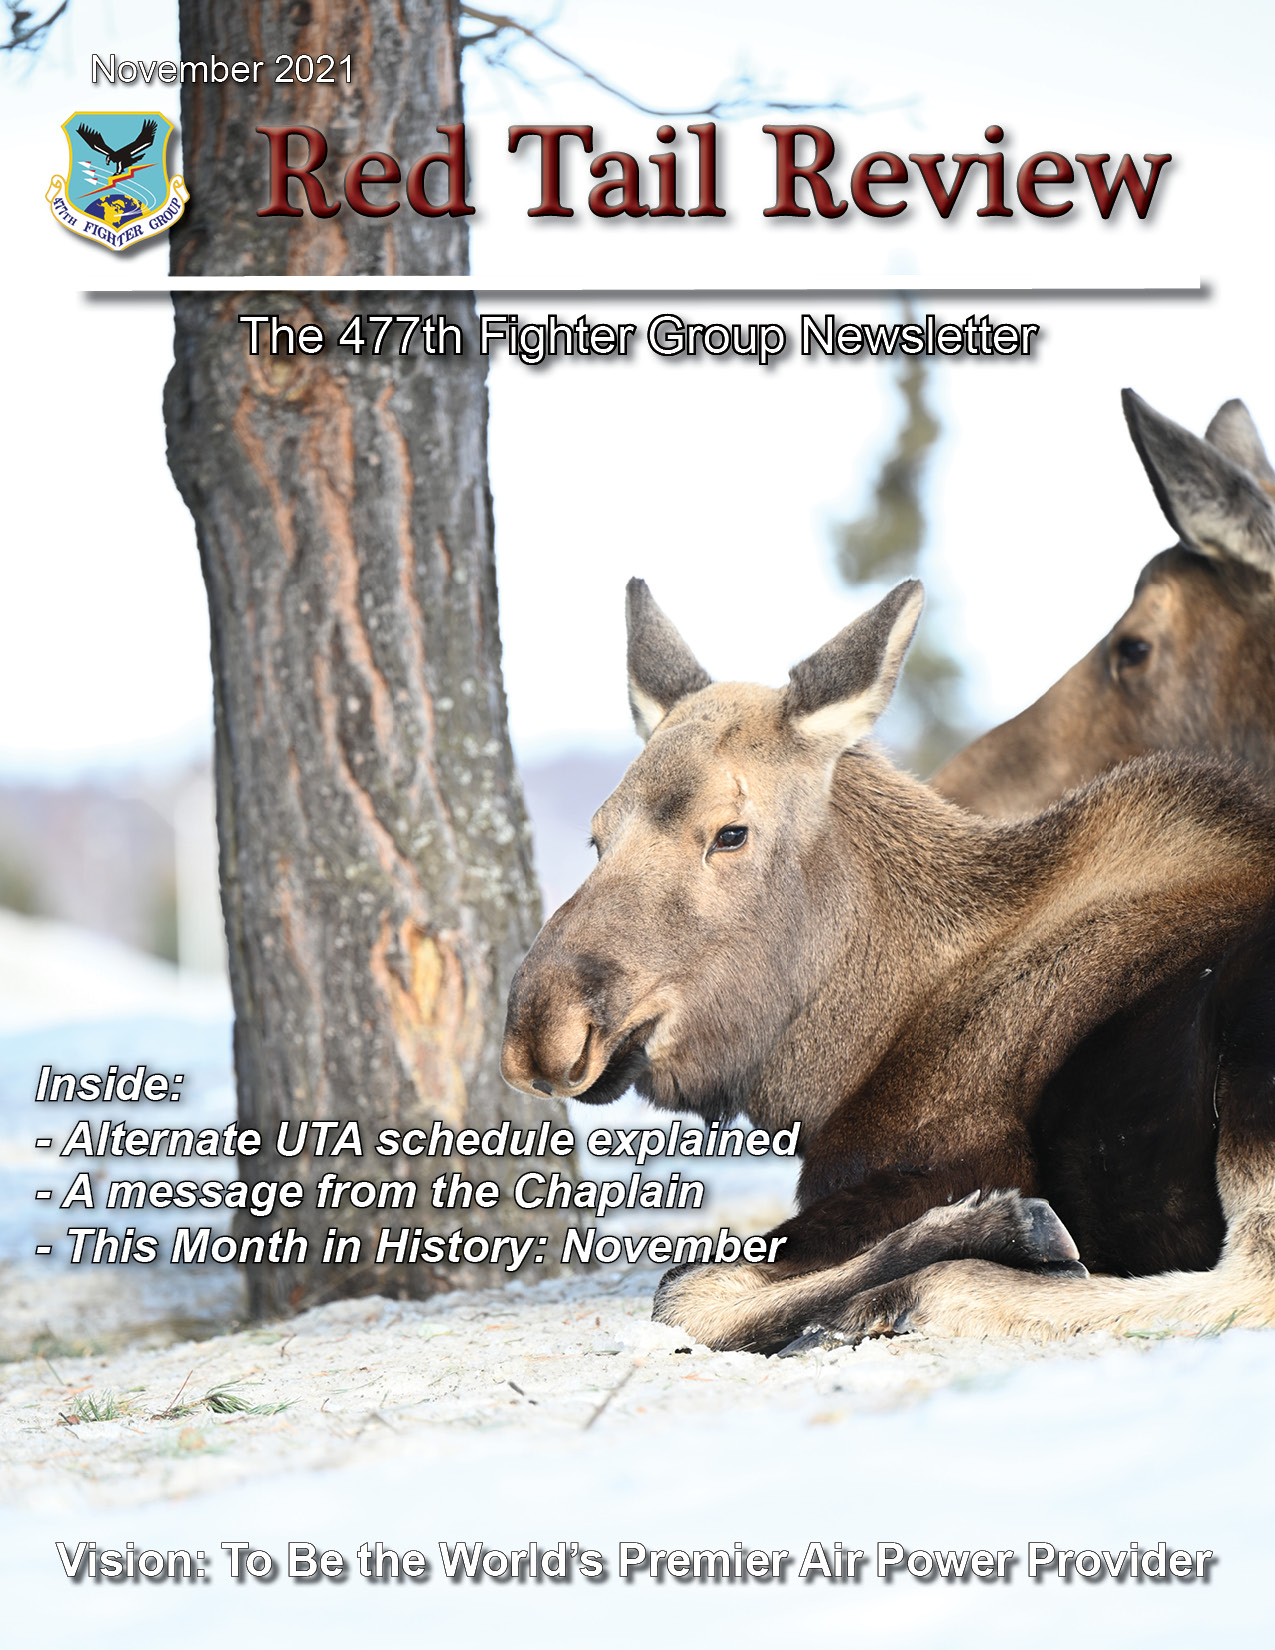 Cover of the Red Tail Review Newsletter for November 2021